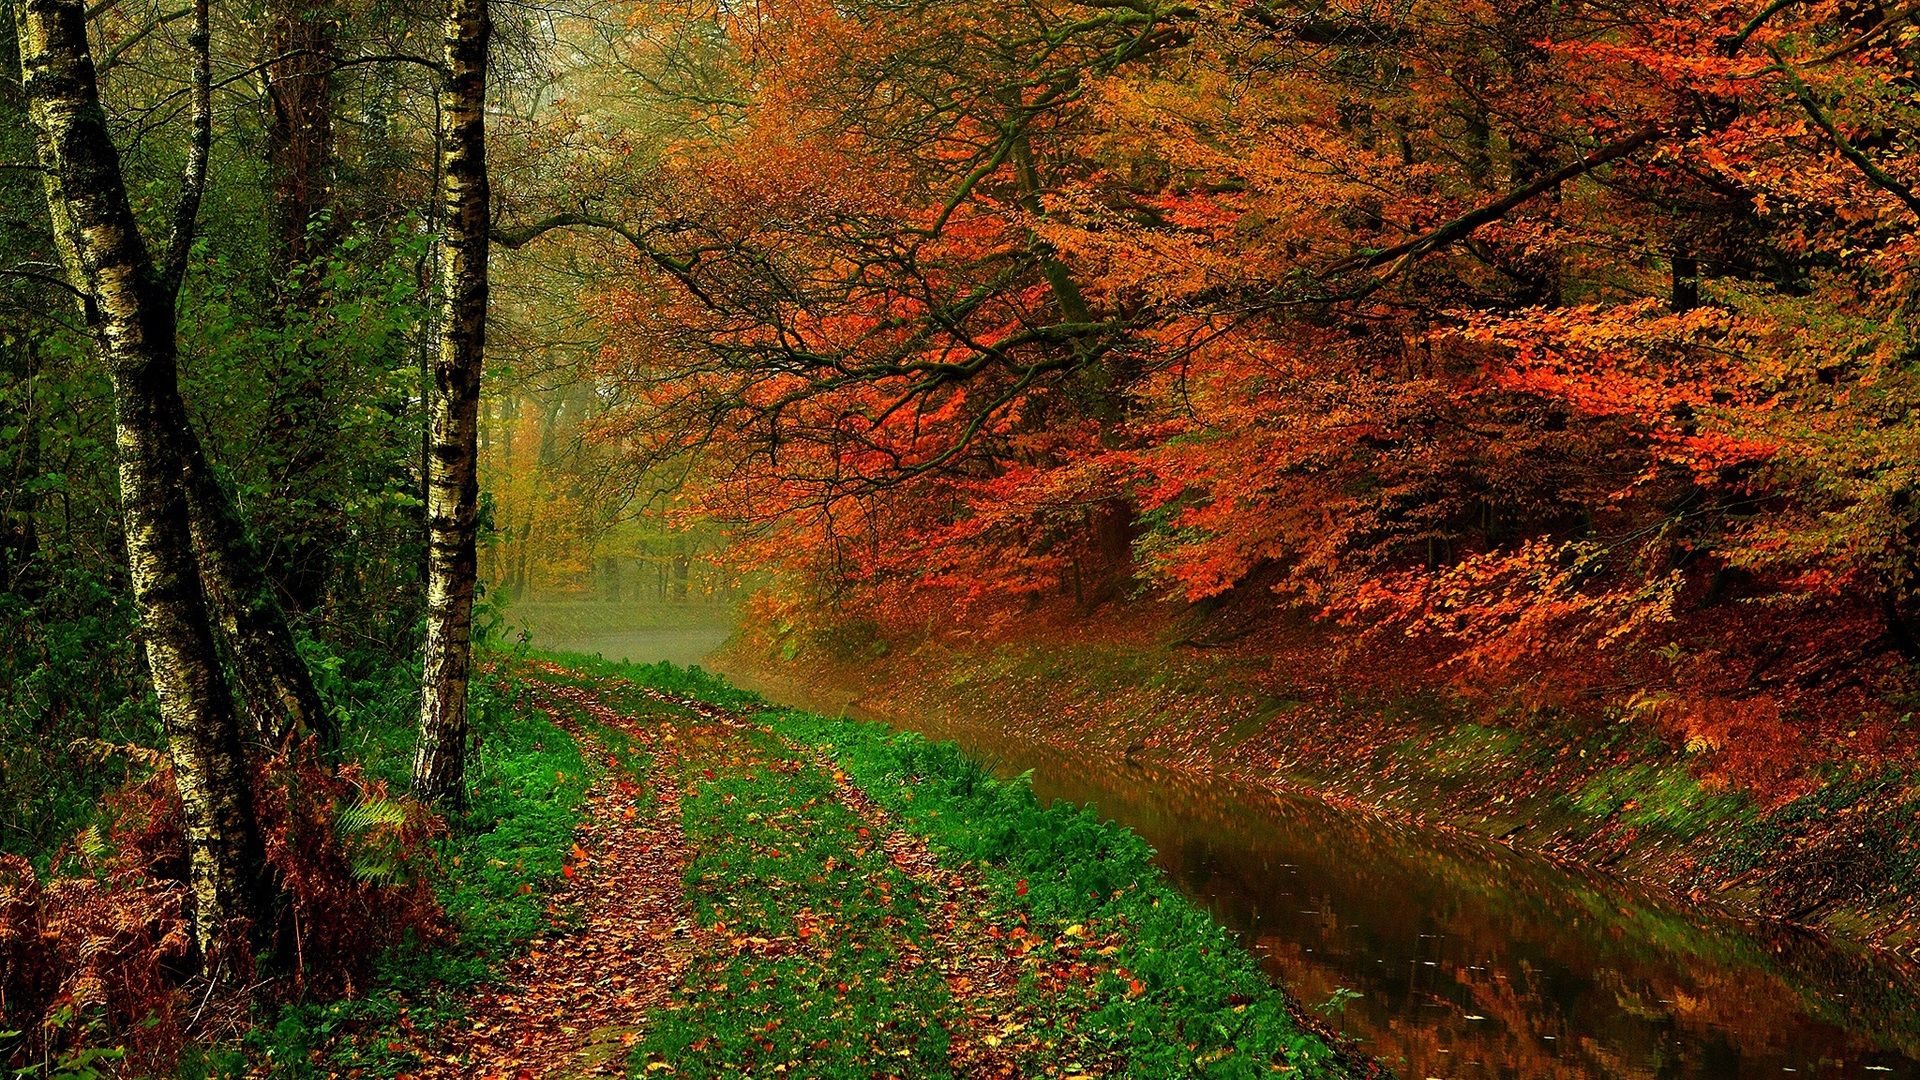 Wallpaper Autumn leaves, trees, forest, autumn, walk path, river 1920x1200 HD Picture, Image